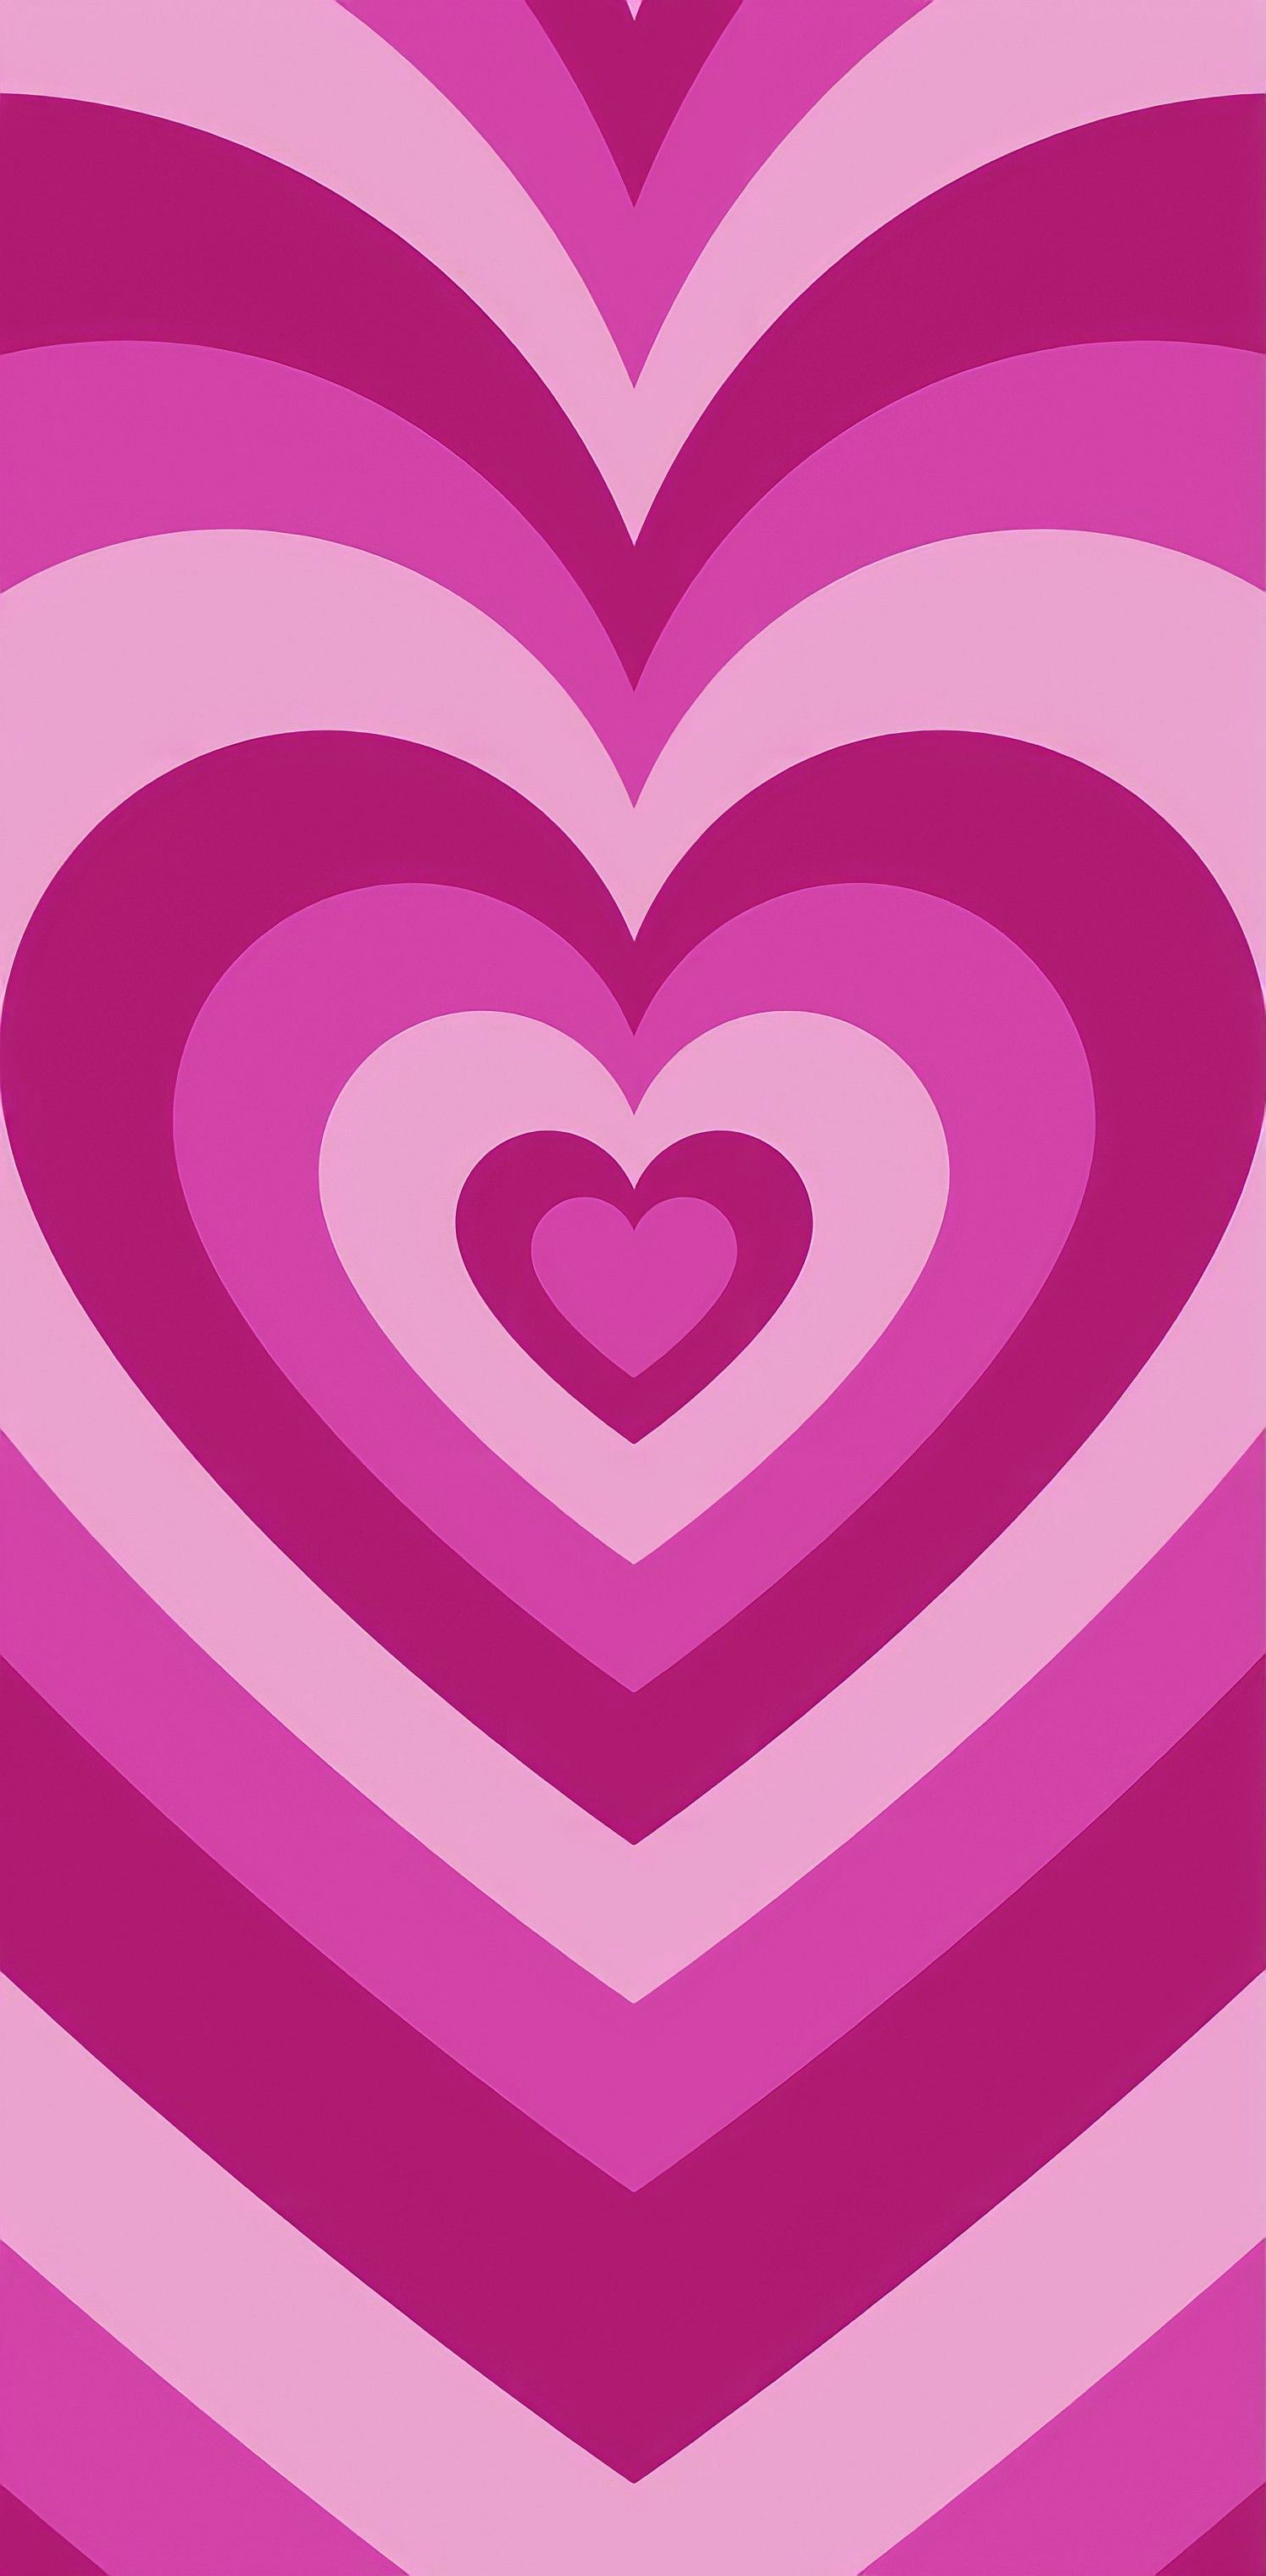 A pink and purple heart iPhone wallpaper - Pink heart